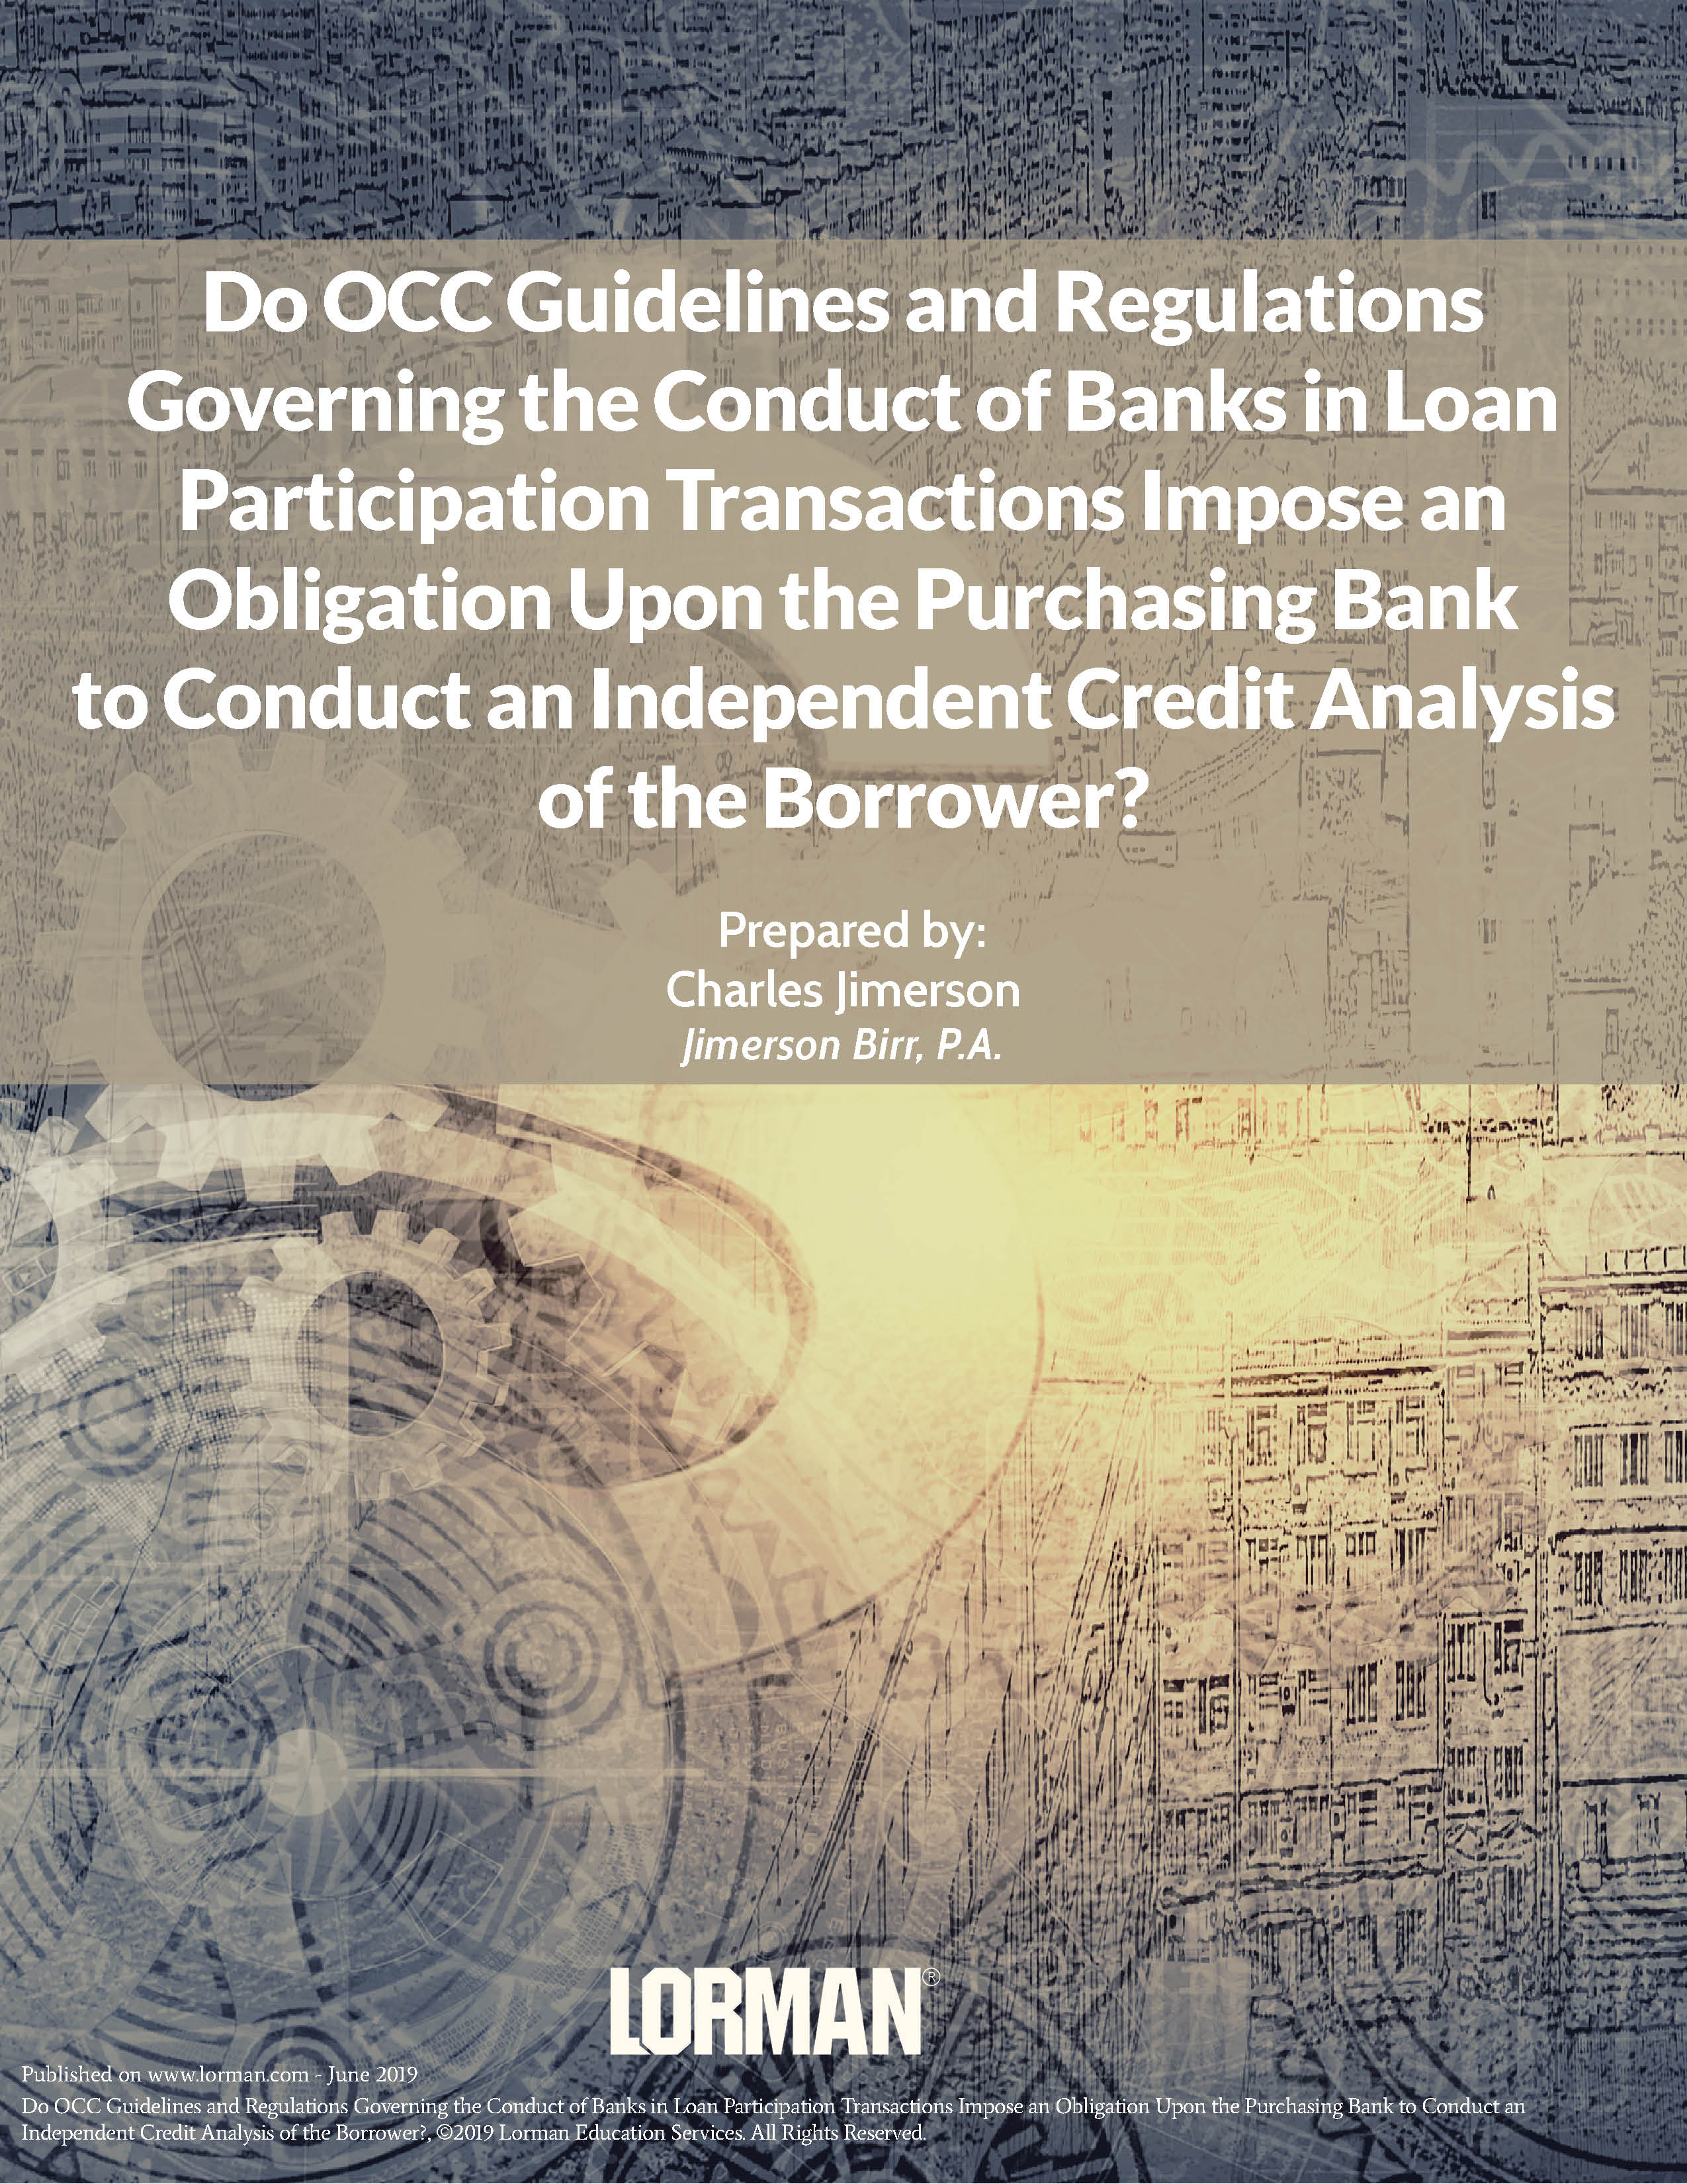 OCC Guidelines & Regulations–Do They Govern the Conduct of Banks in Loan Participation Transactions?